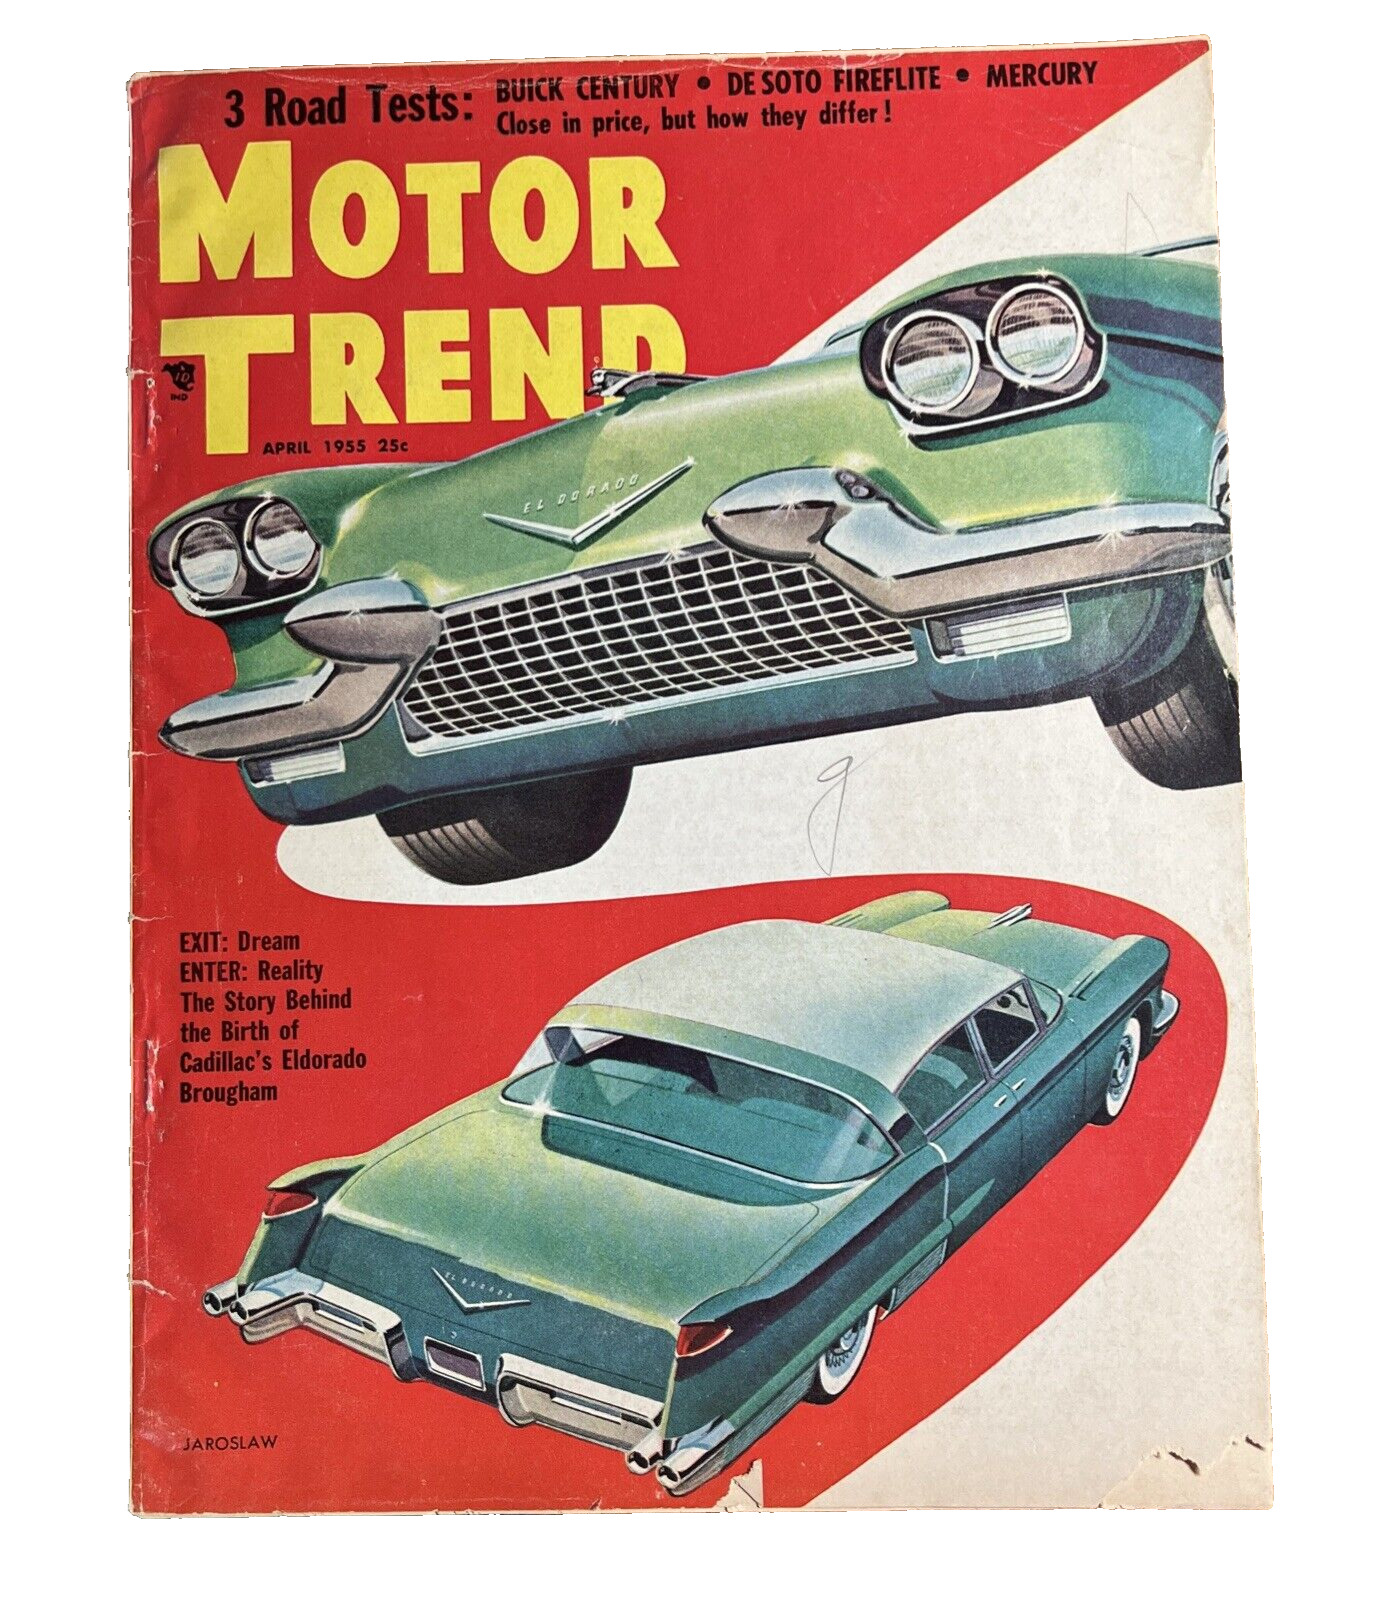 MOTOR TREND MAGAZINE MAY 1954 AUTOMOBILE CAR NEWS & ADVERTISING VINTAGE